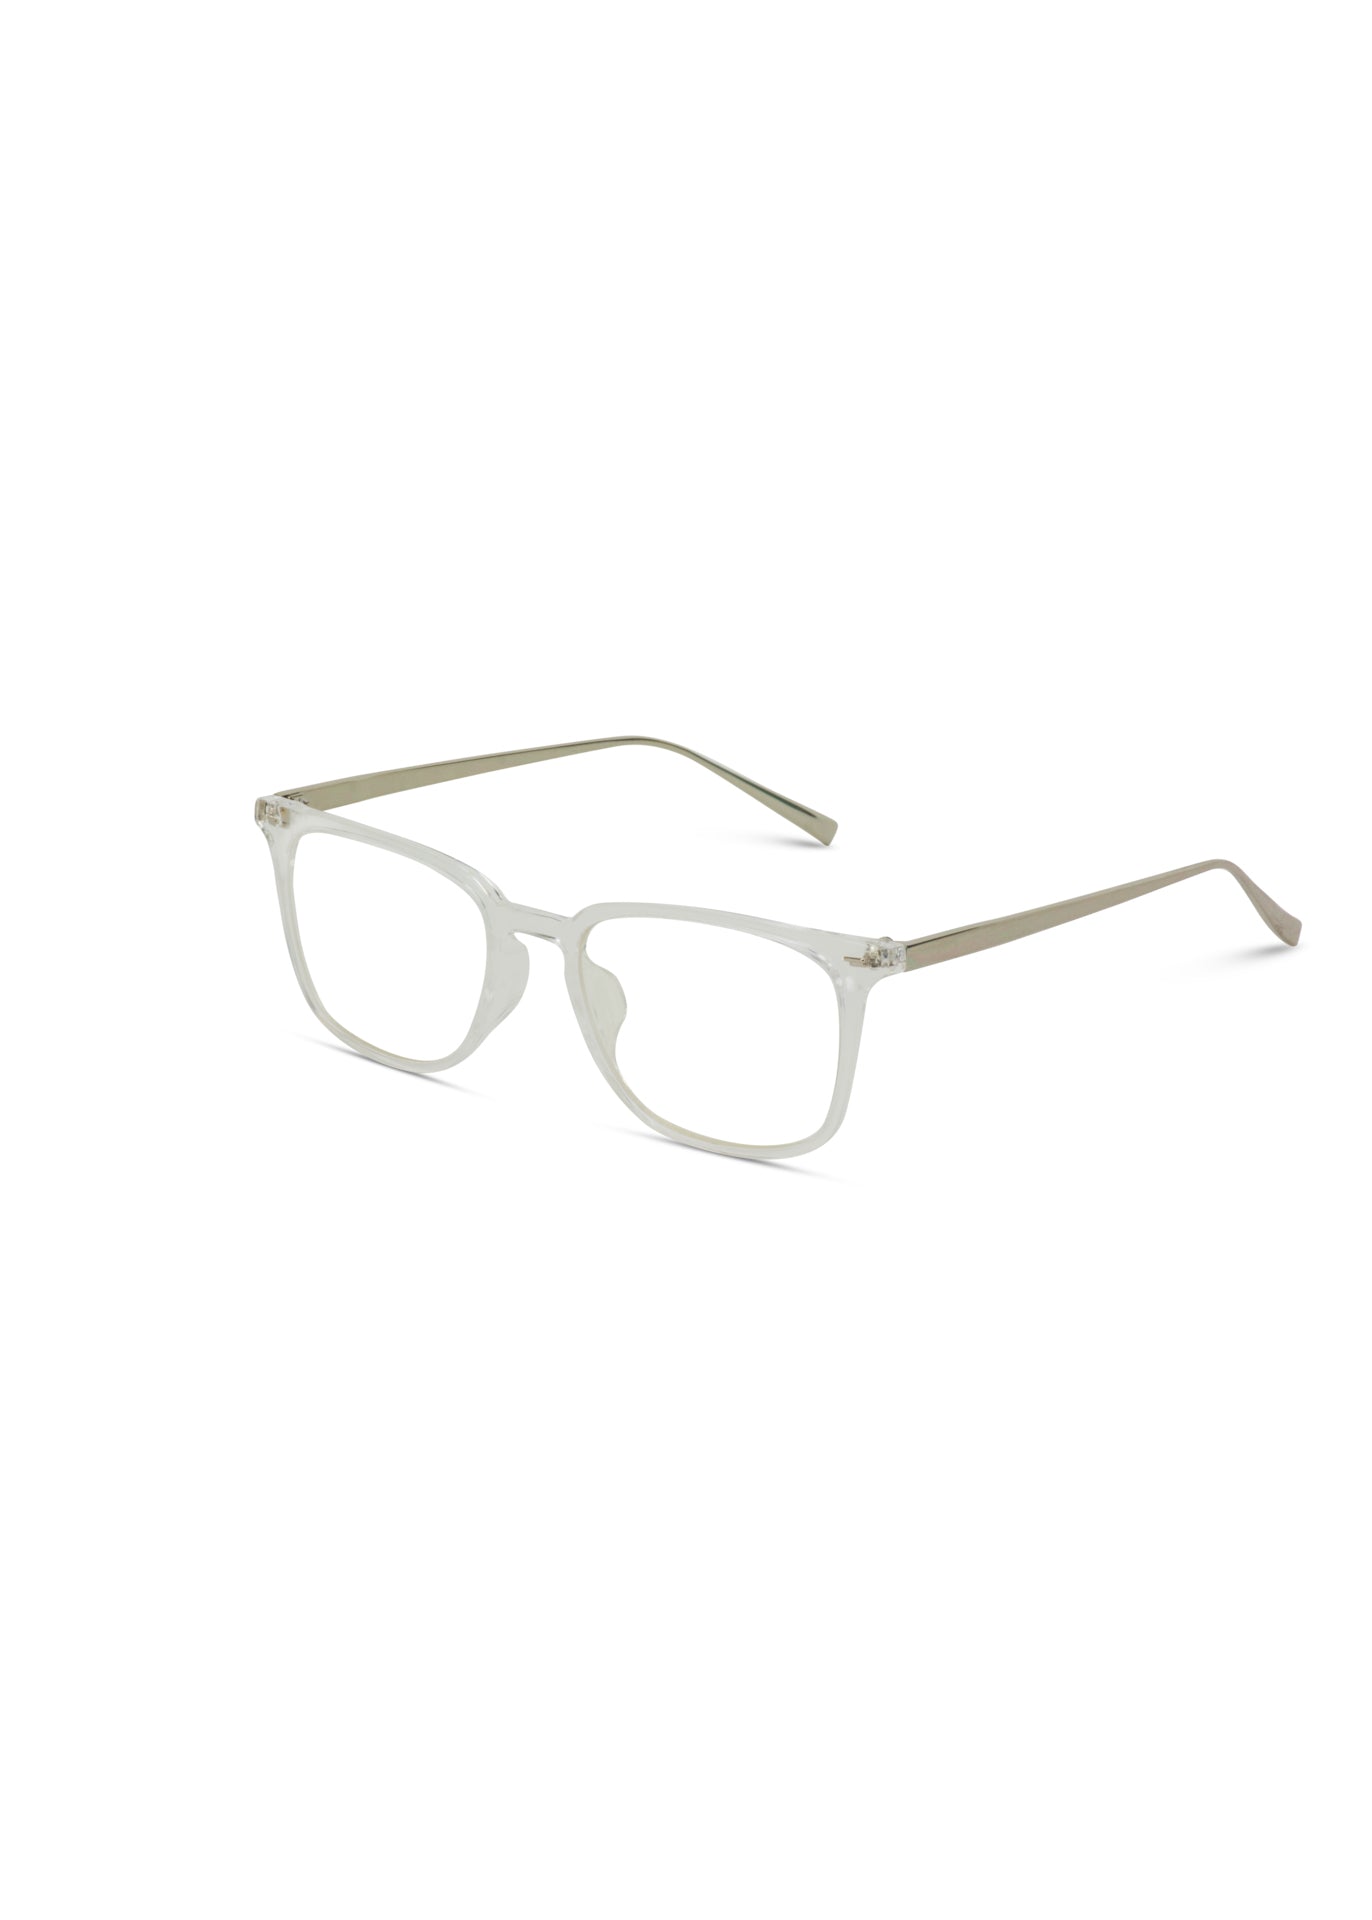 Clear Rectangle Blue Light Glasses Accessories